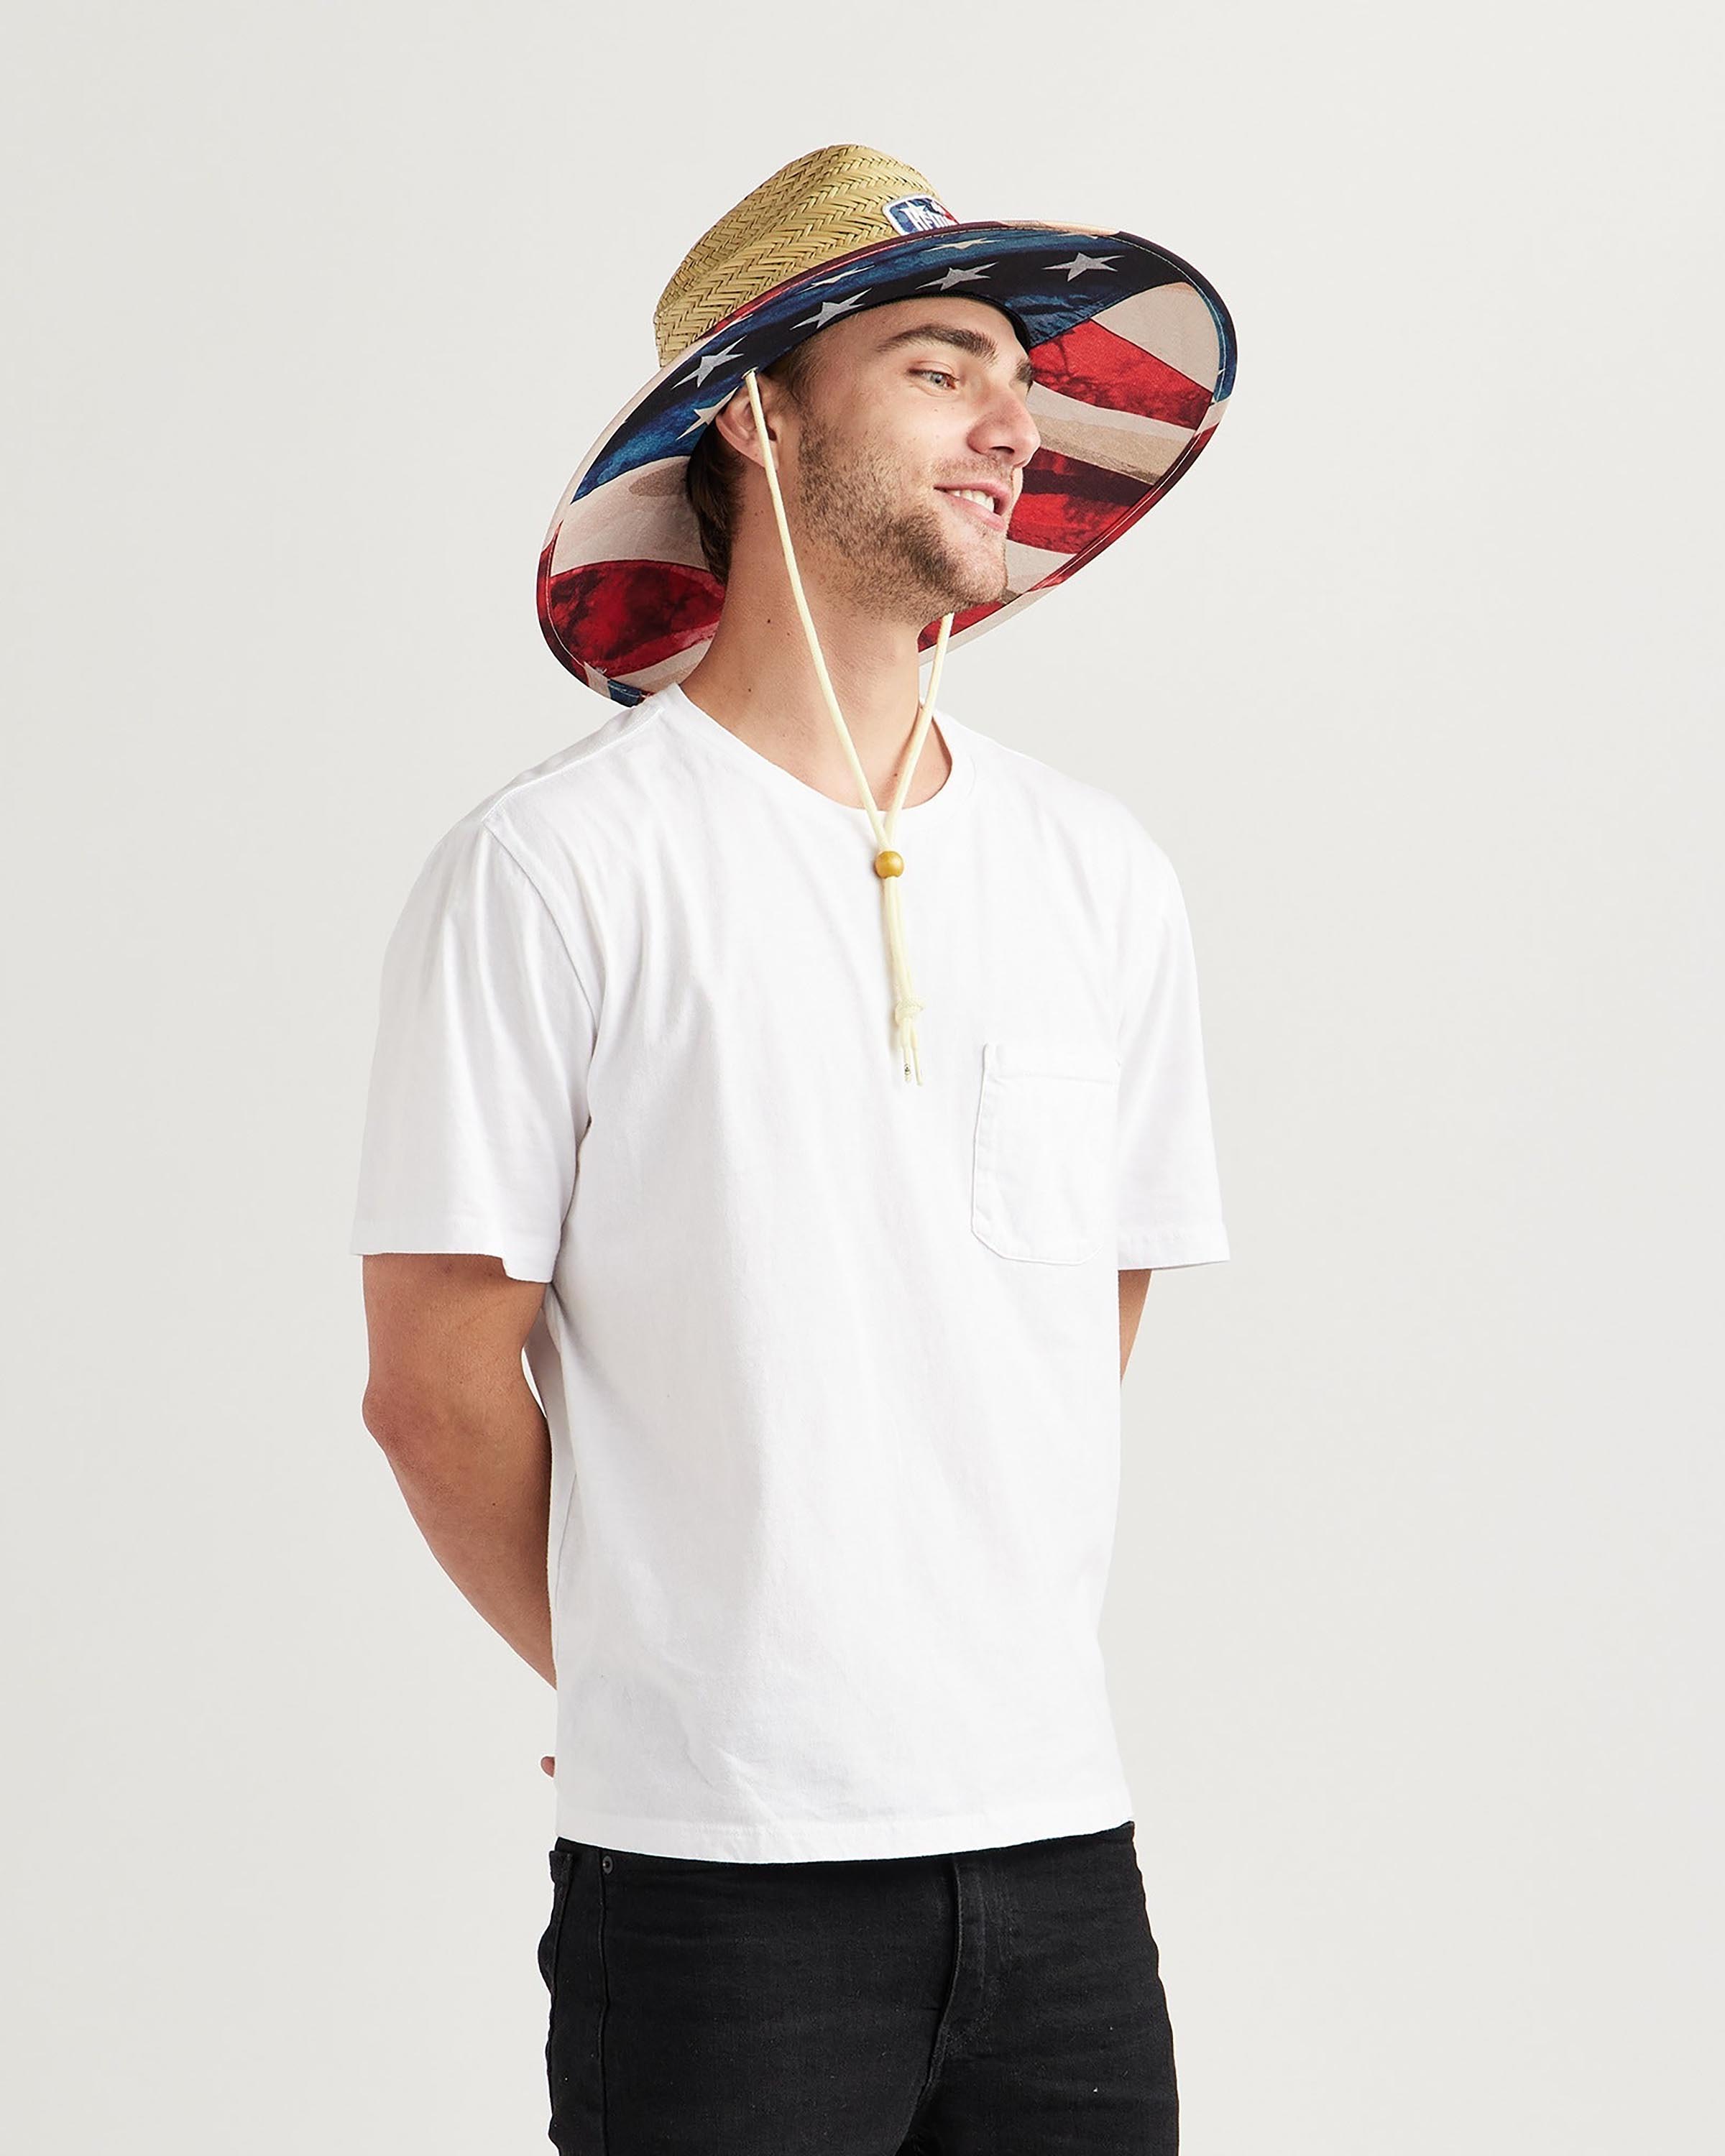 Hemlock male model looking right wearing Liberty straw lifeguard hat with USA flag pattern